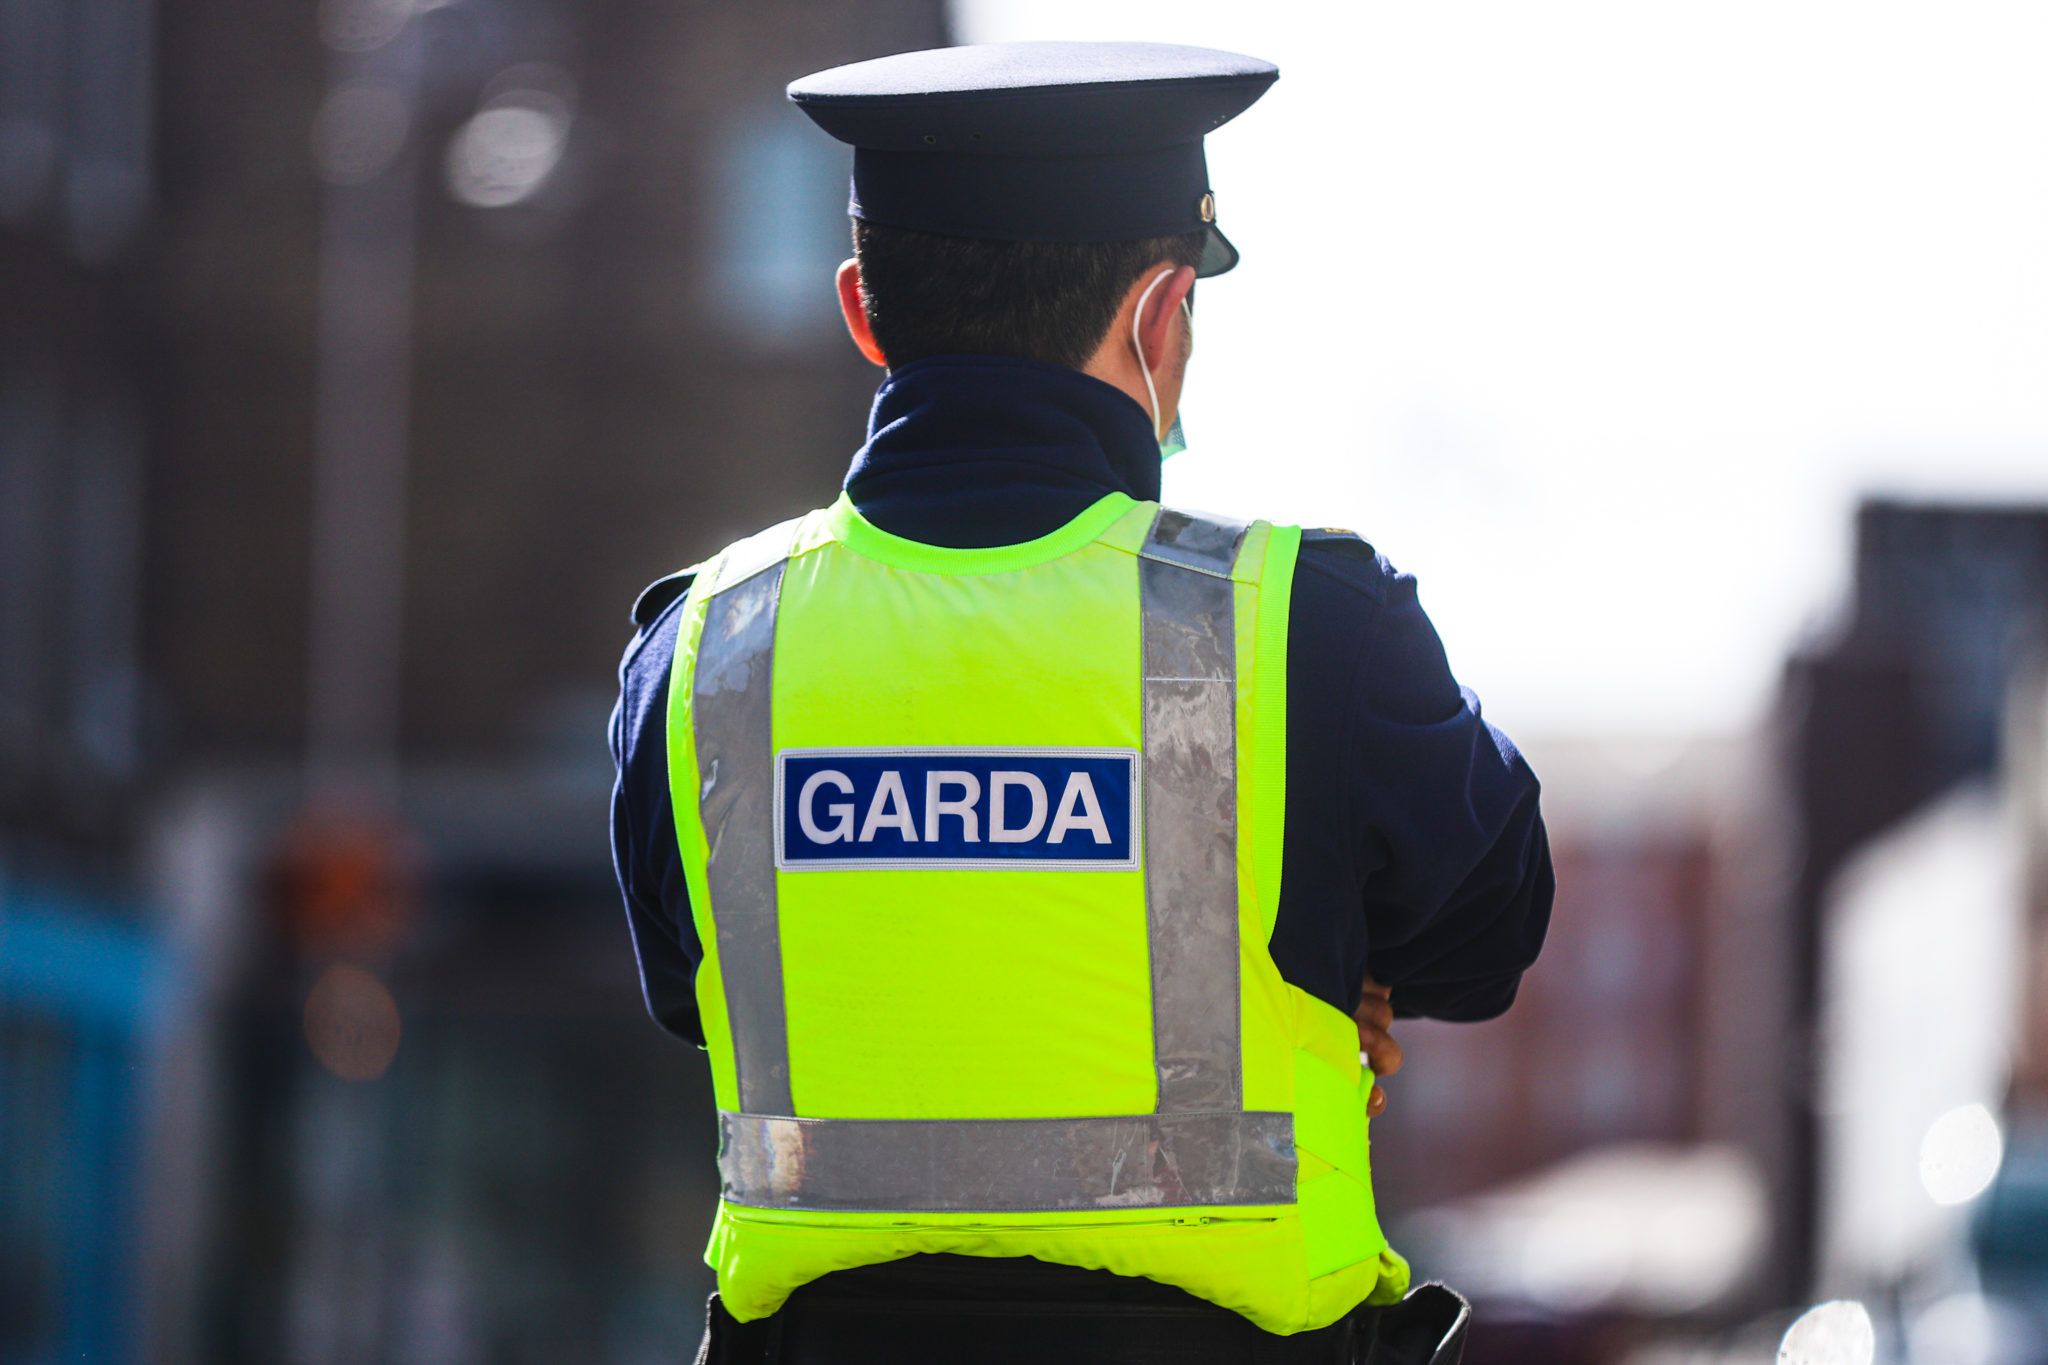 Gardaí launch a new app to ‘index’ all your personal effects in case of theft